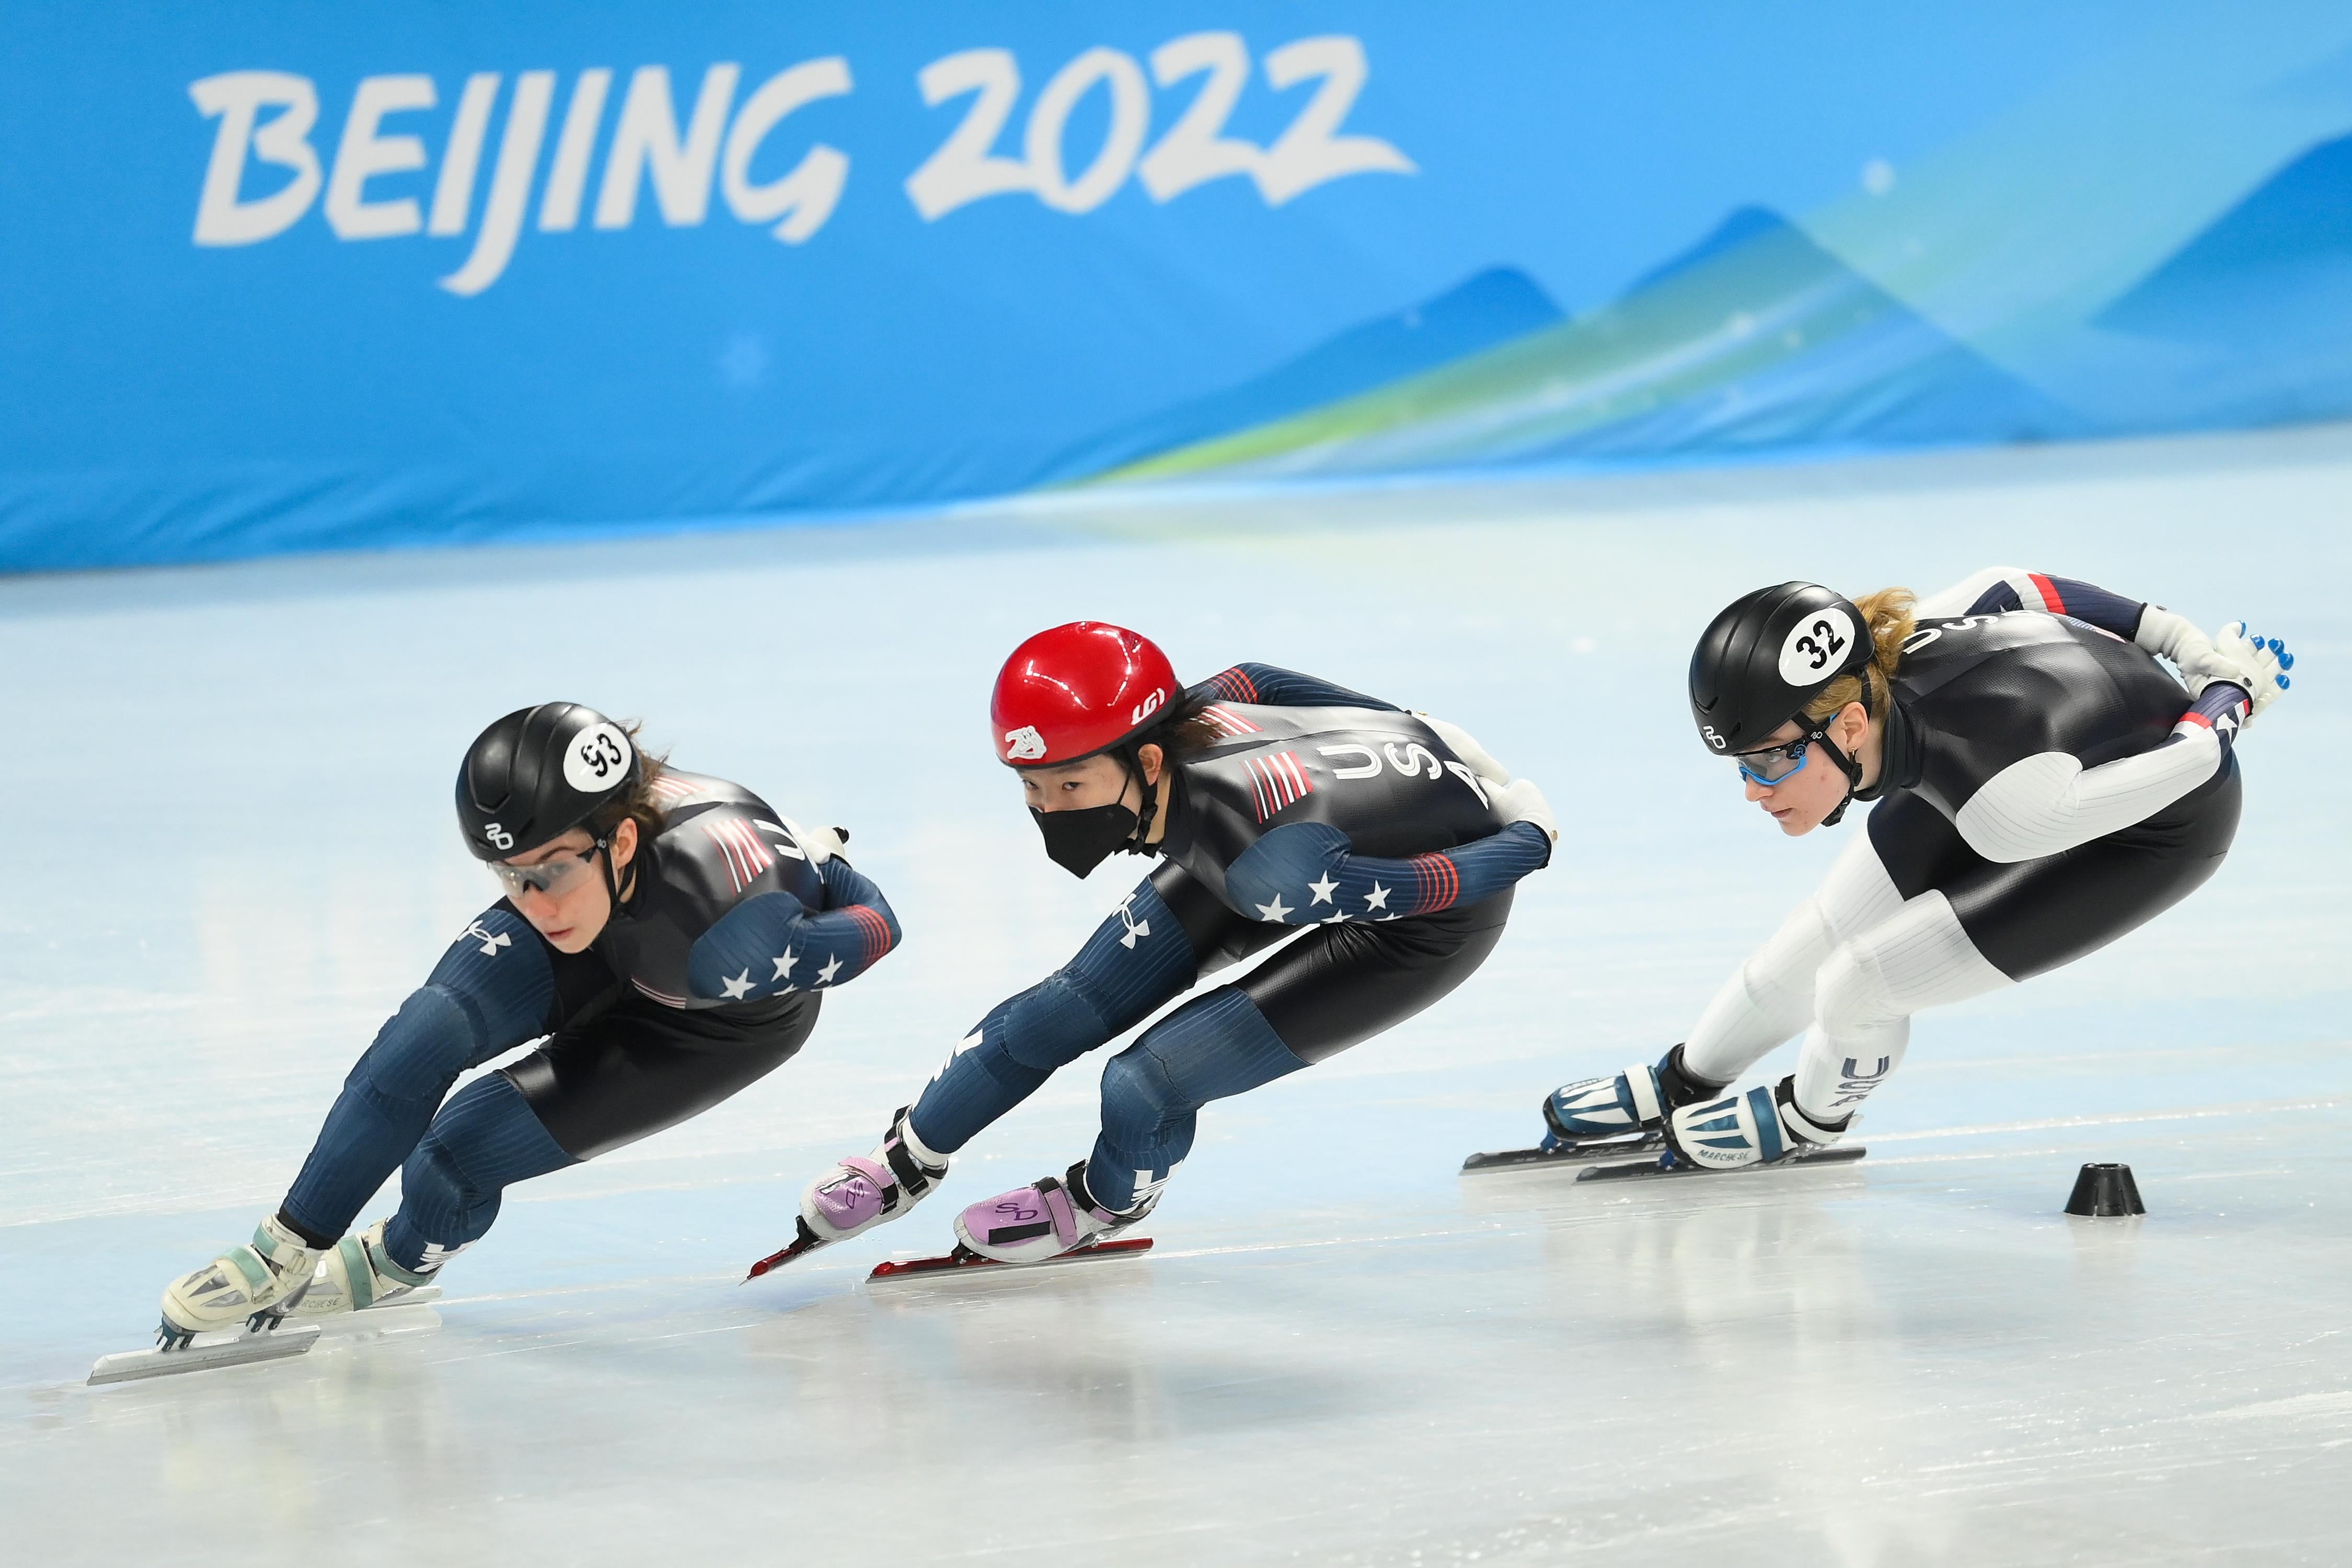 Three women speed skate in a single line with text on the wall behind them that says Beijing 2022.